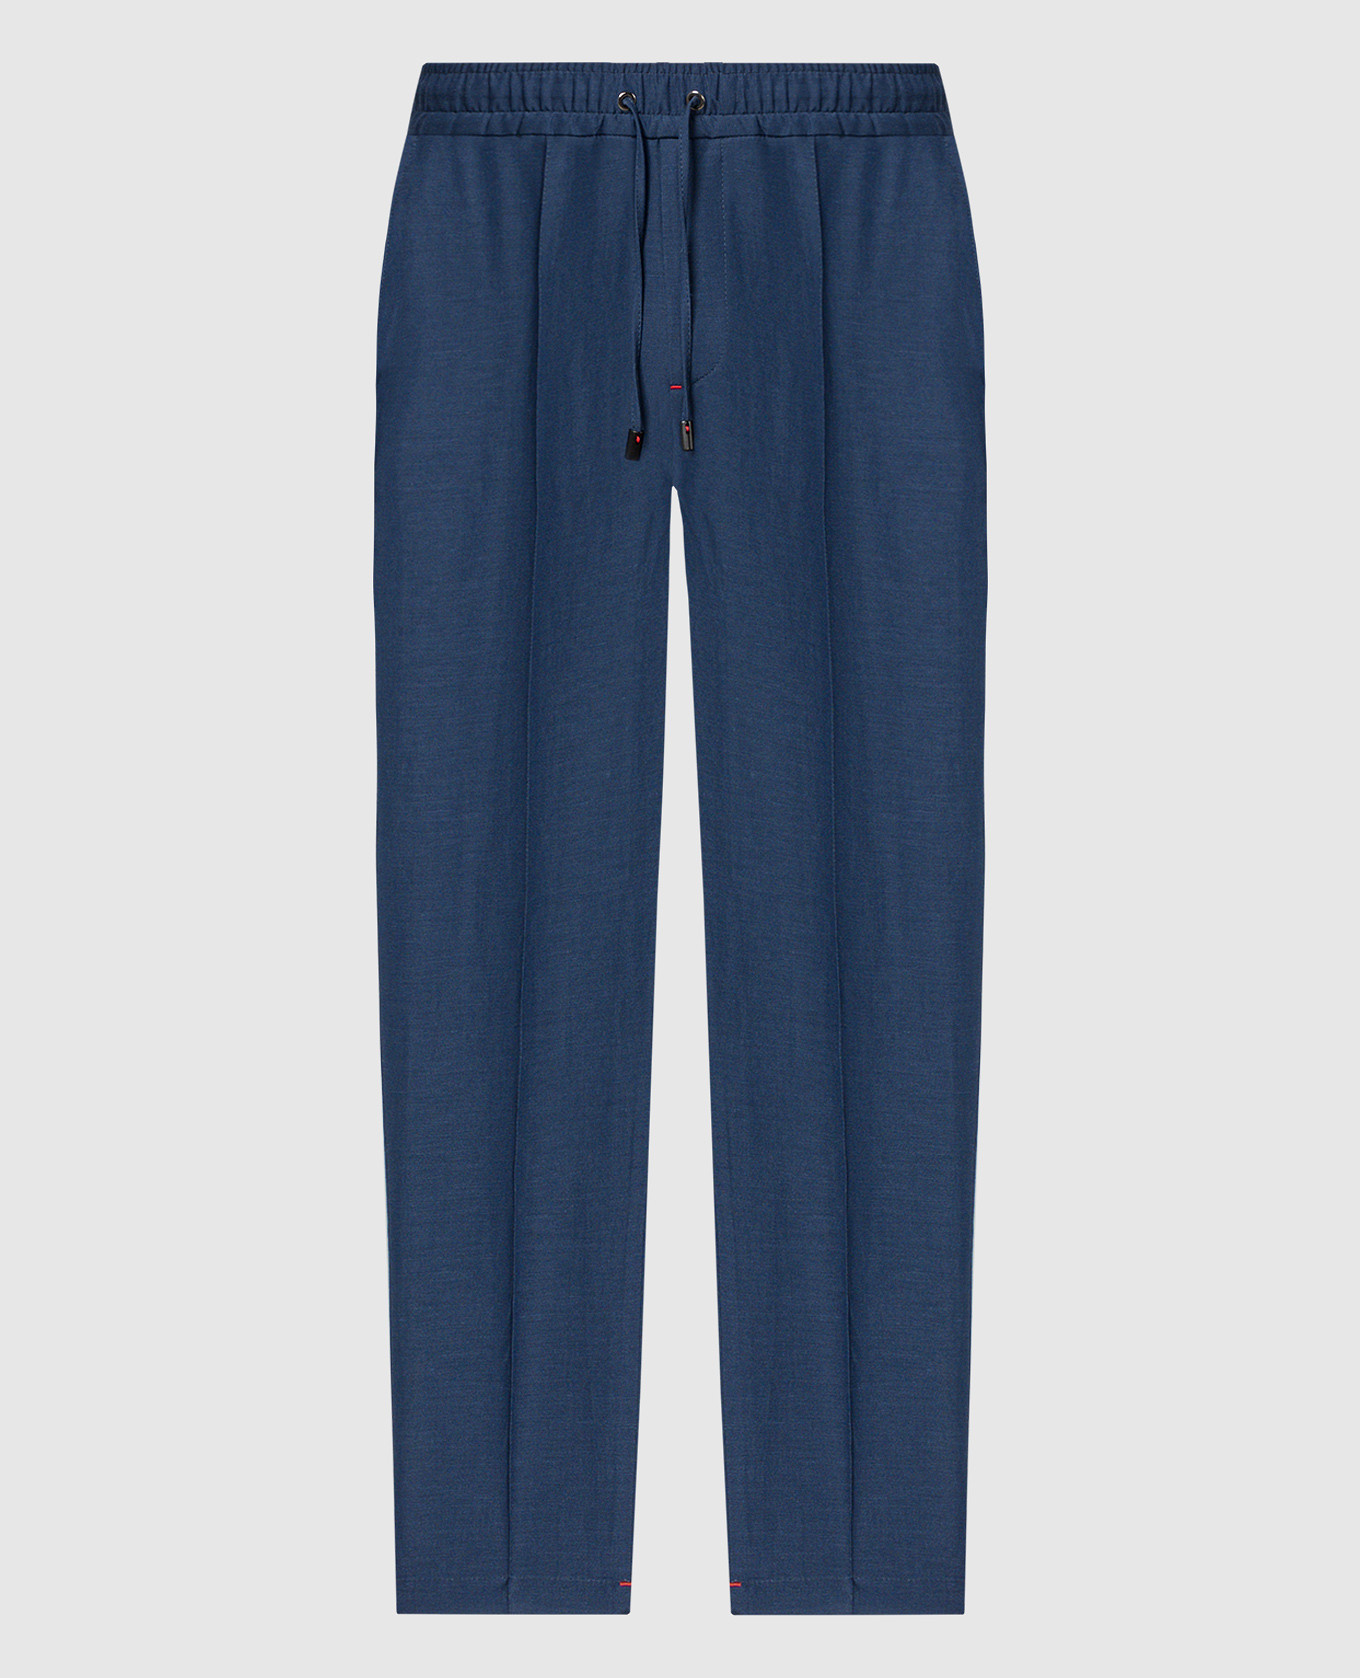 Blue logo trousers in wool and linen